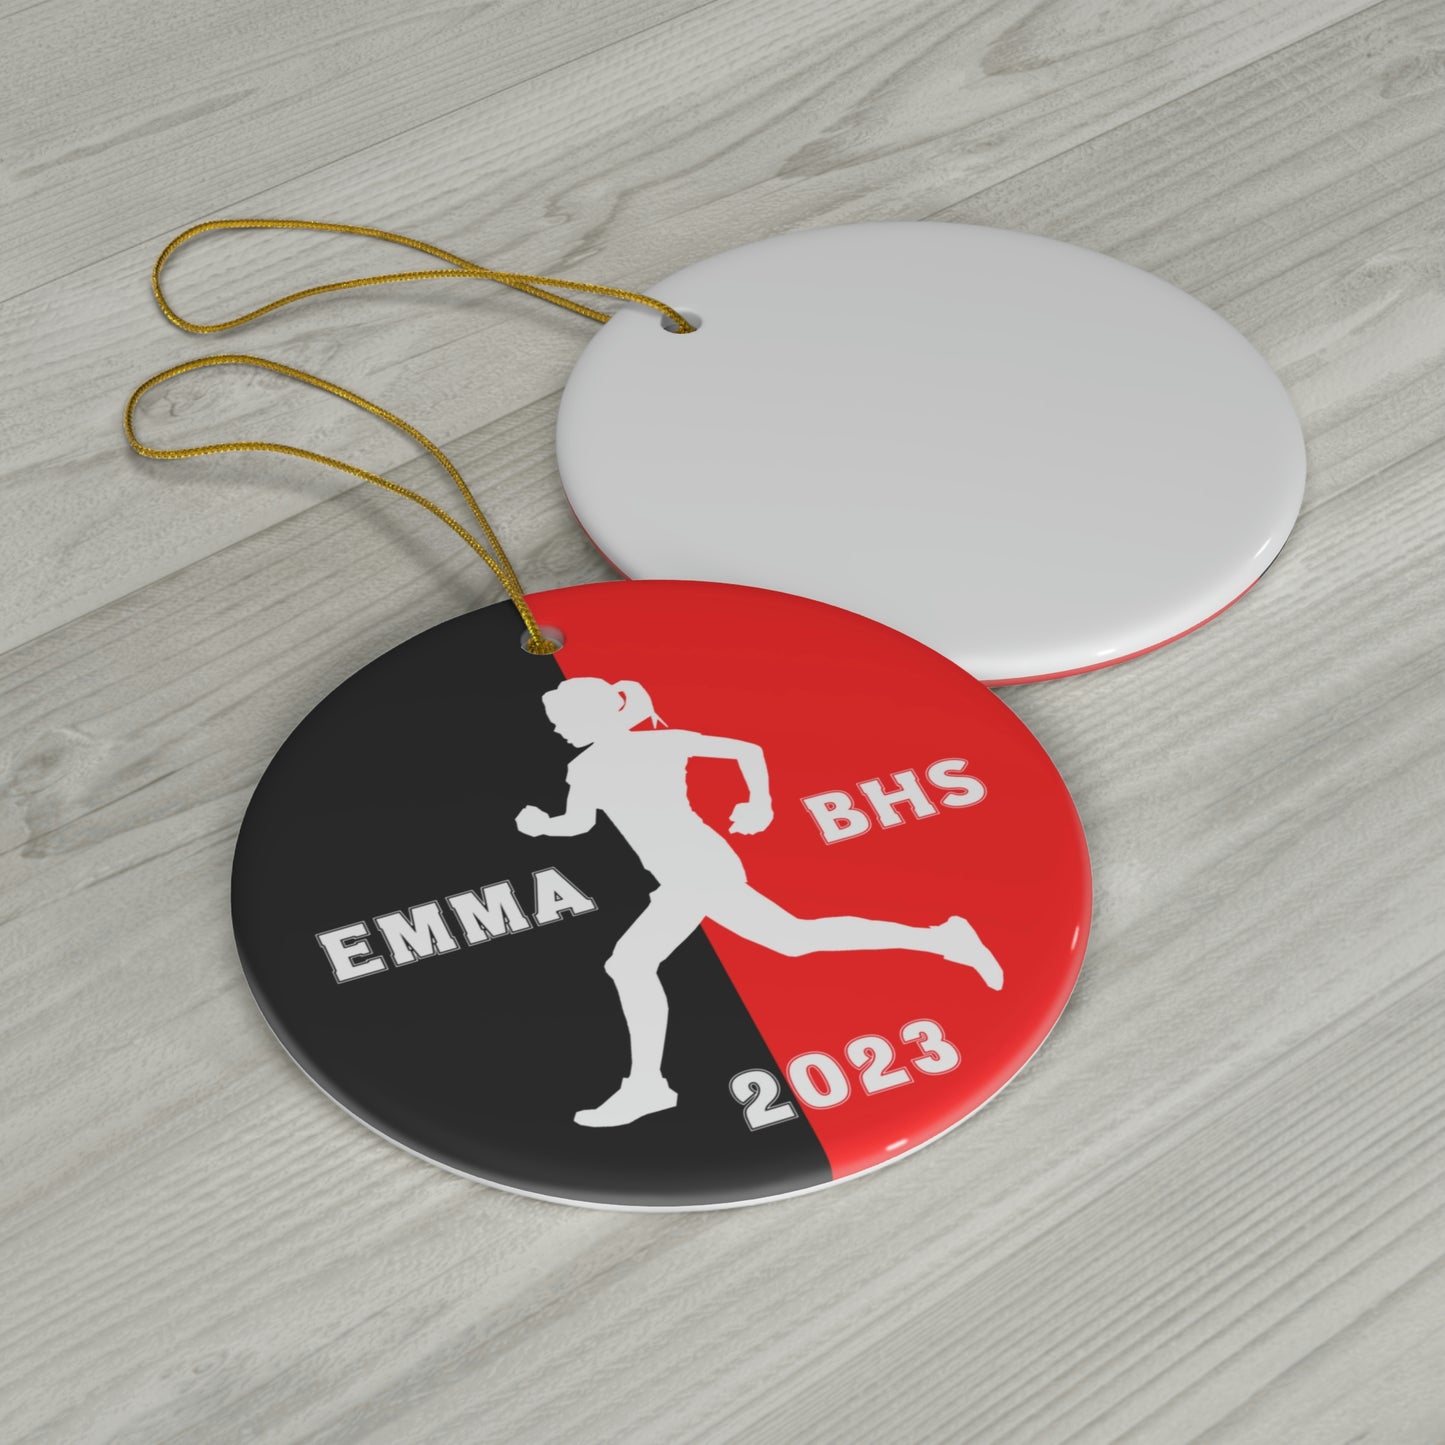 Personalized Runner Christmas Ornament